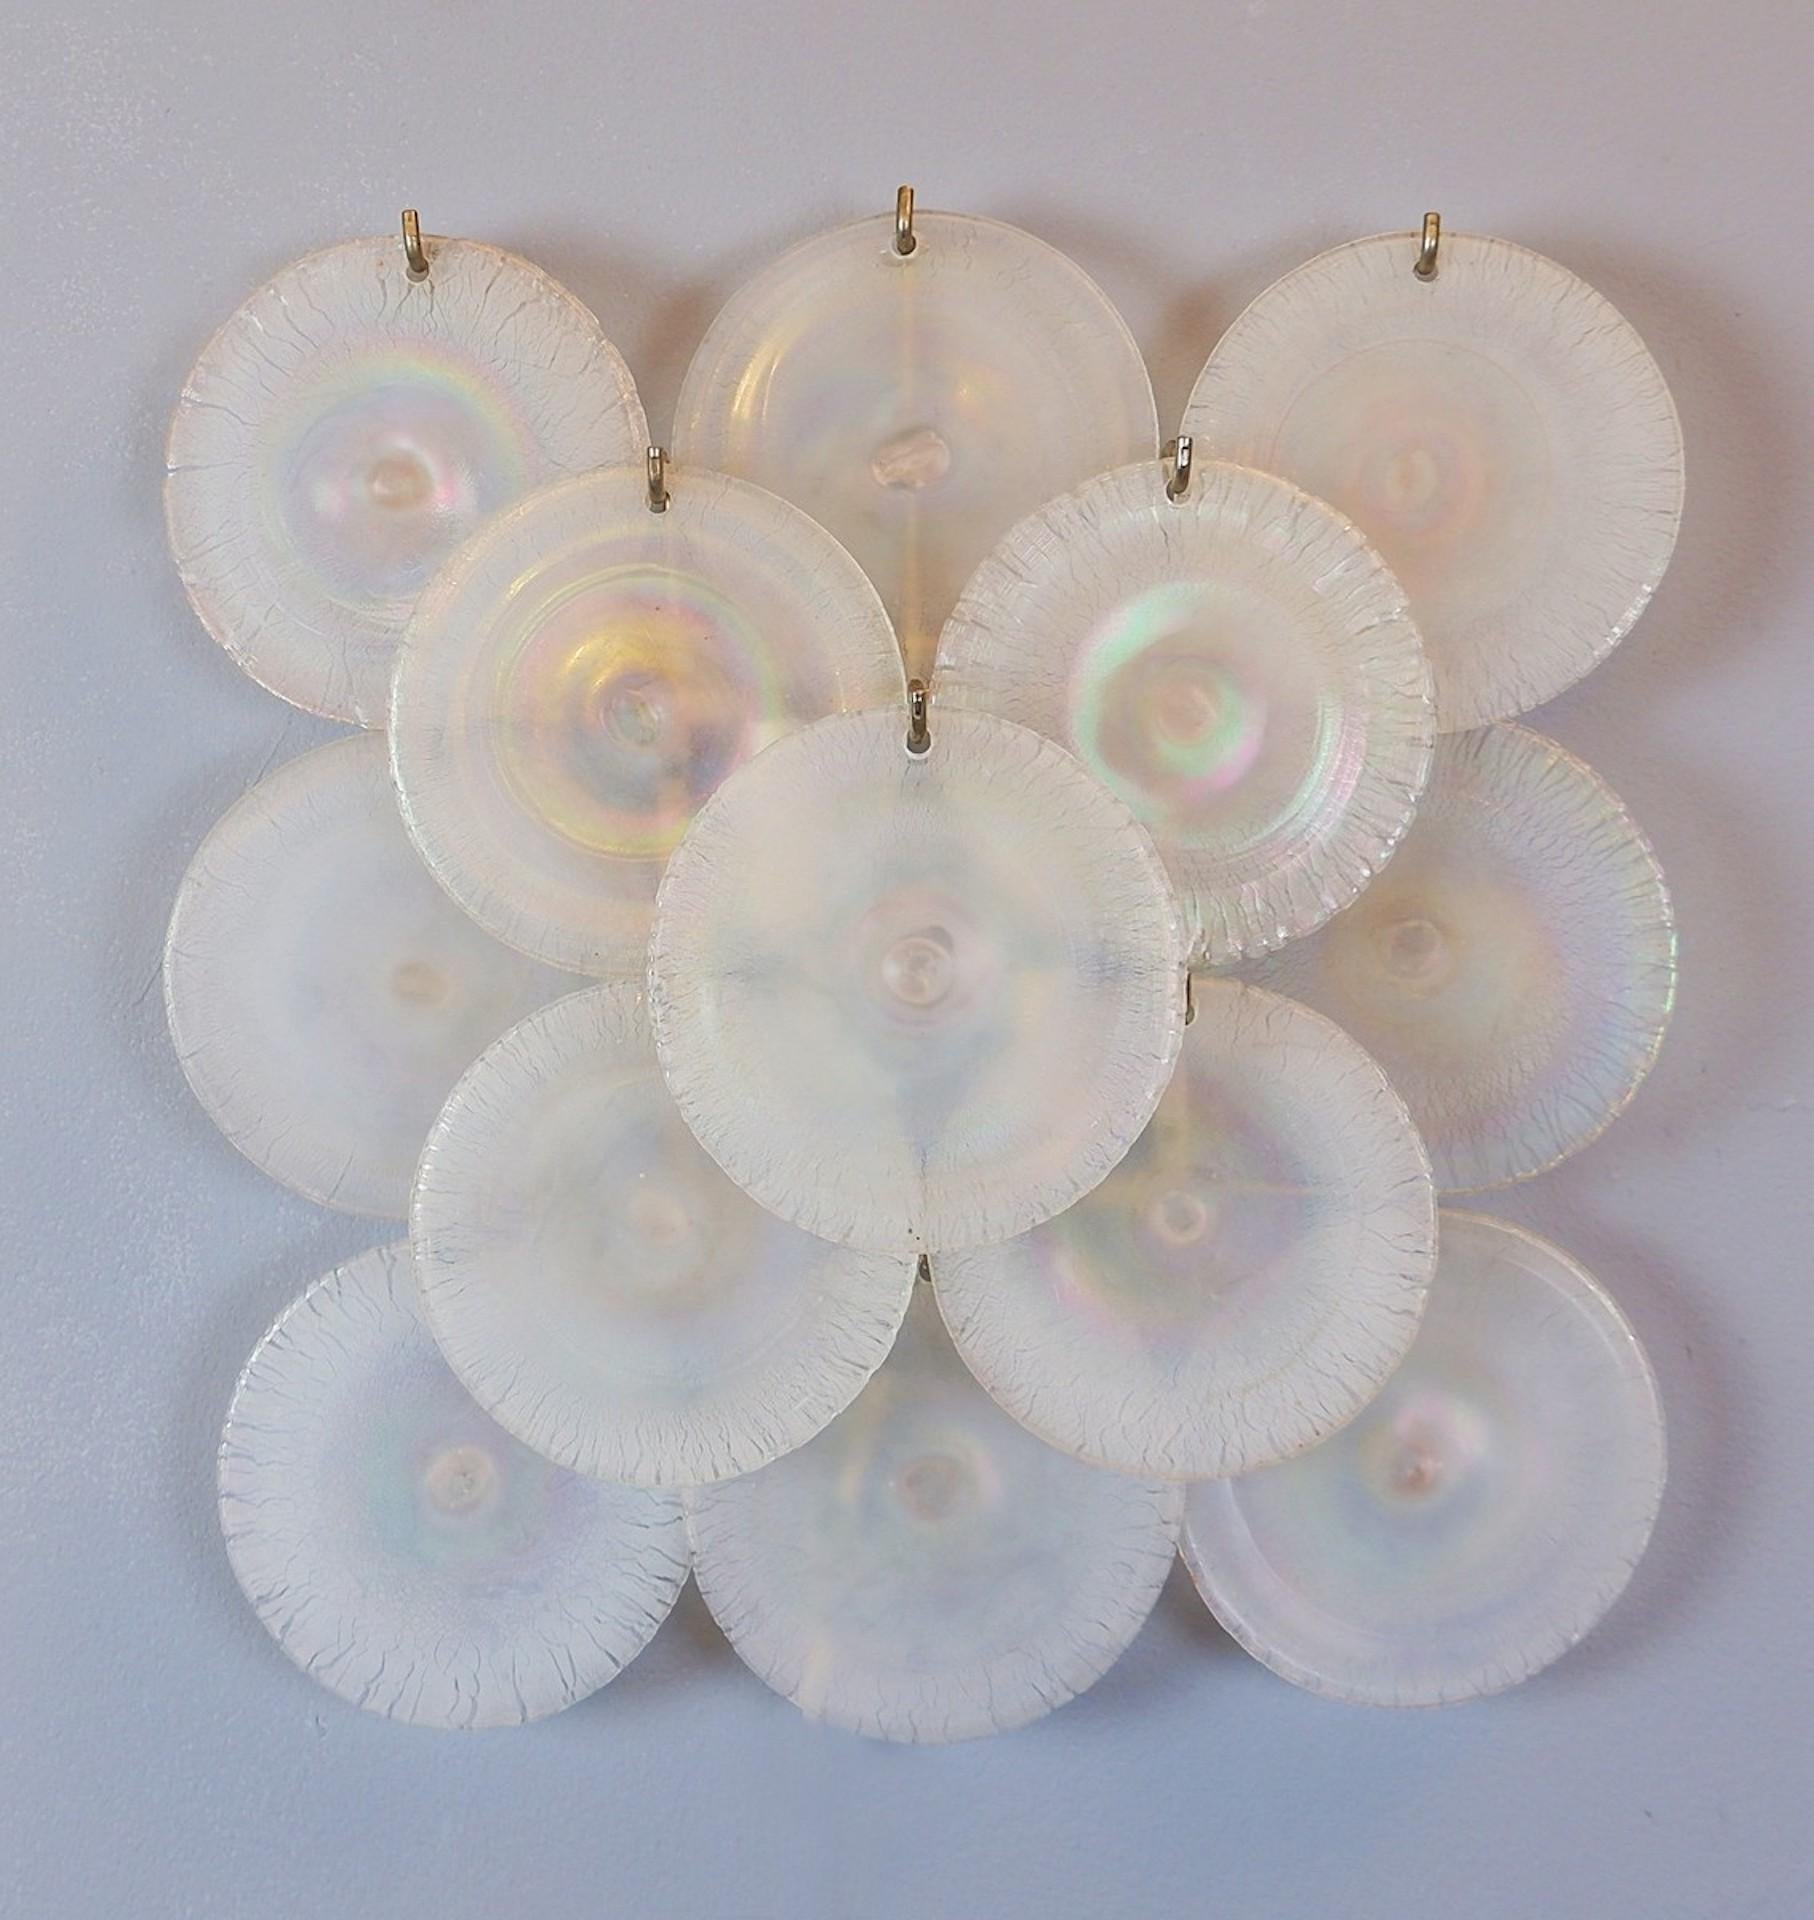 Mid-20th Century Pair of Carlo Nason Wall Lamps with Murano Glass Discs 1960s '2 Pairs Available'